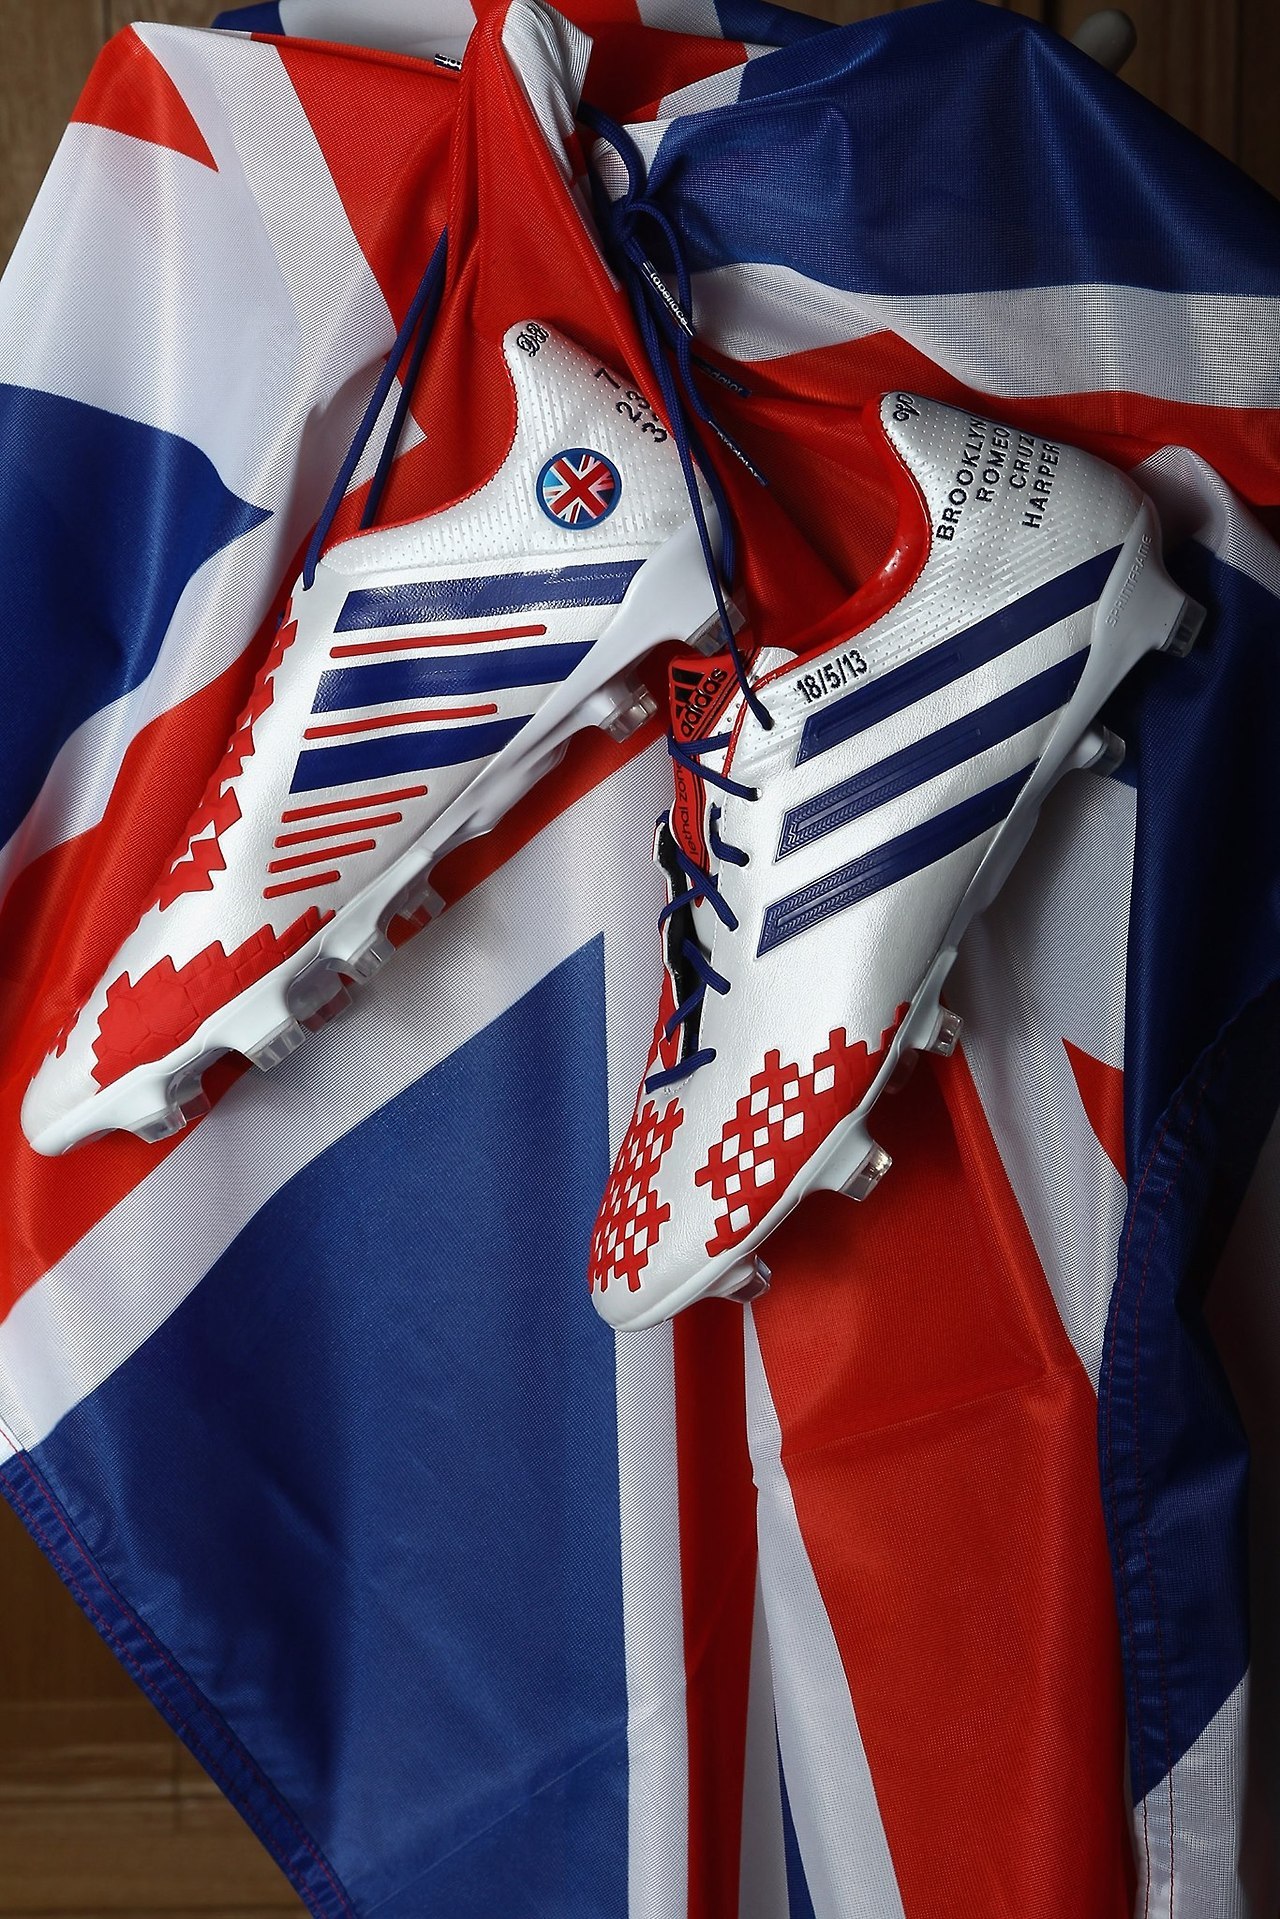 Beckham’s boots for his final game David Beckham plays in the final match of his career today. As he heads into retirement, he carries the pride of Great Britain on his feet with adidas Predator LZs. Typical Becks.